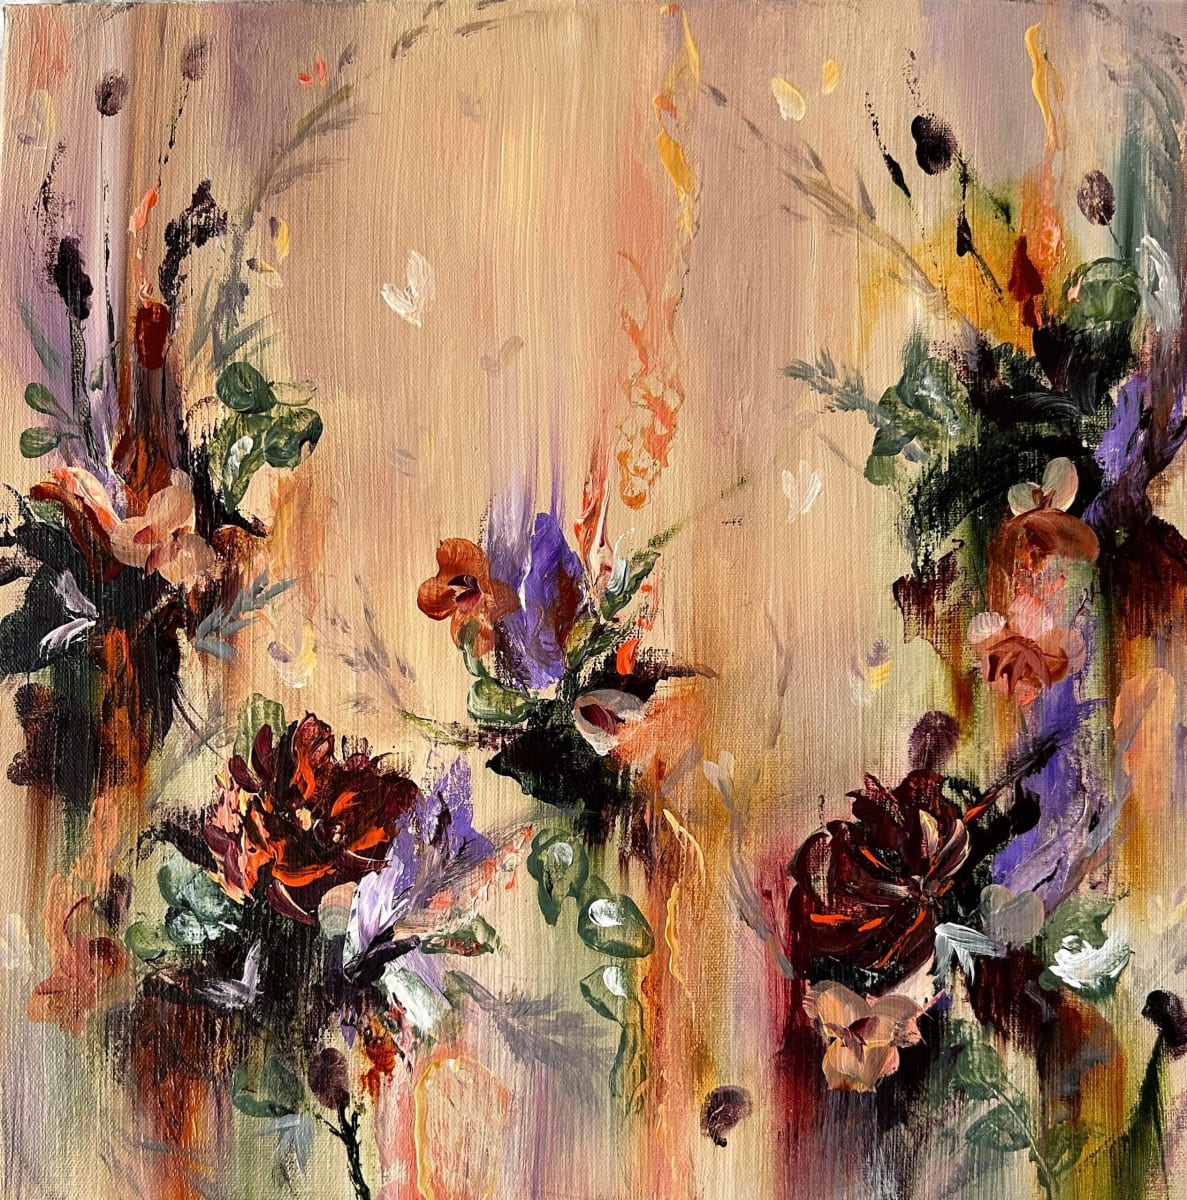 ‘Delicate Feminity’ by Catherine Grace  Image: 🌸 Embracing the essence of ‘Delicate Femininity.’ A cascade of nature’s hues, from lavender whispers to fiery orange blooms, gracefully dripping onto a canvas of enchantment. 🎨✨ #ArtisticElegance #FloralDreams #FeminineGrace #ColorfulCanvas #NatureInArt